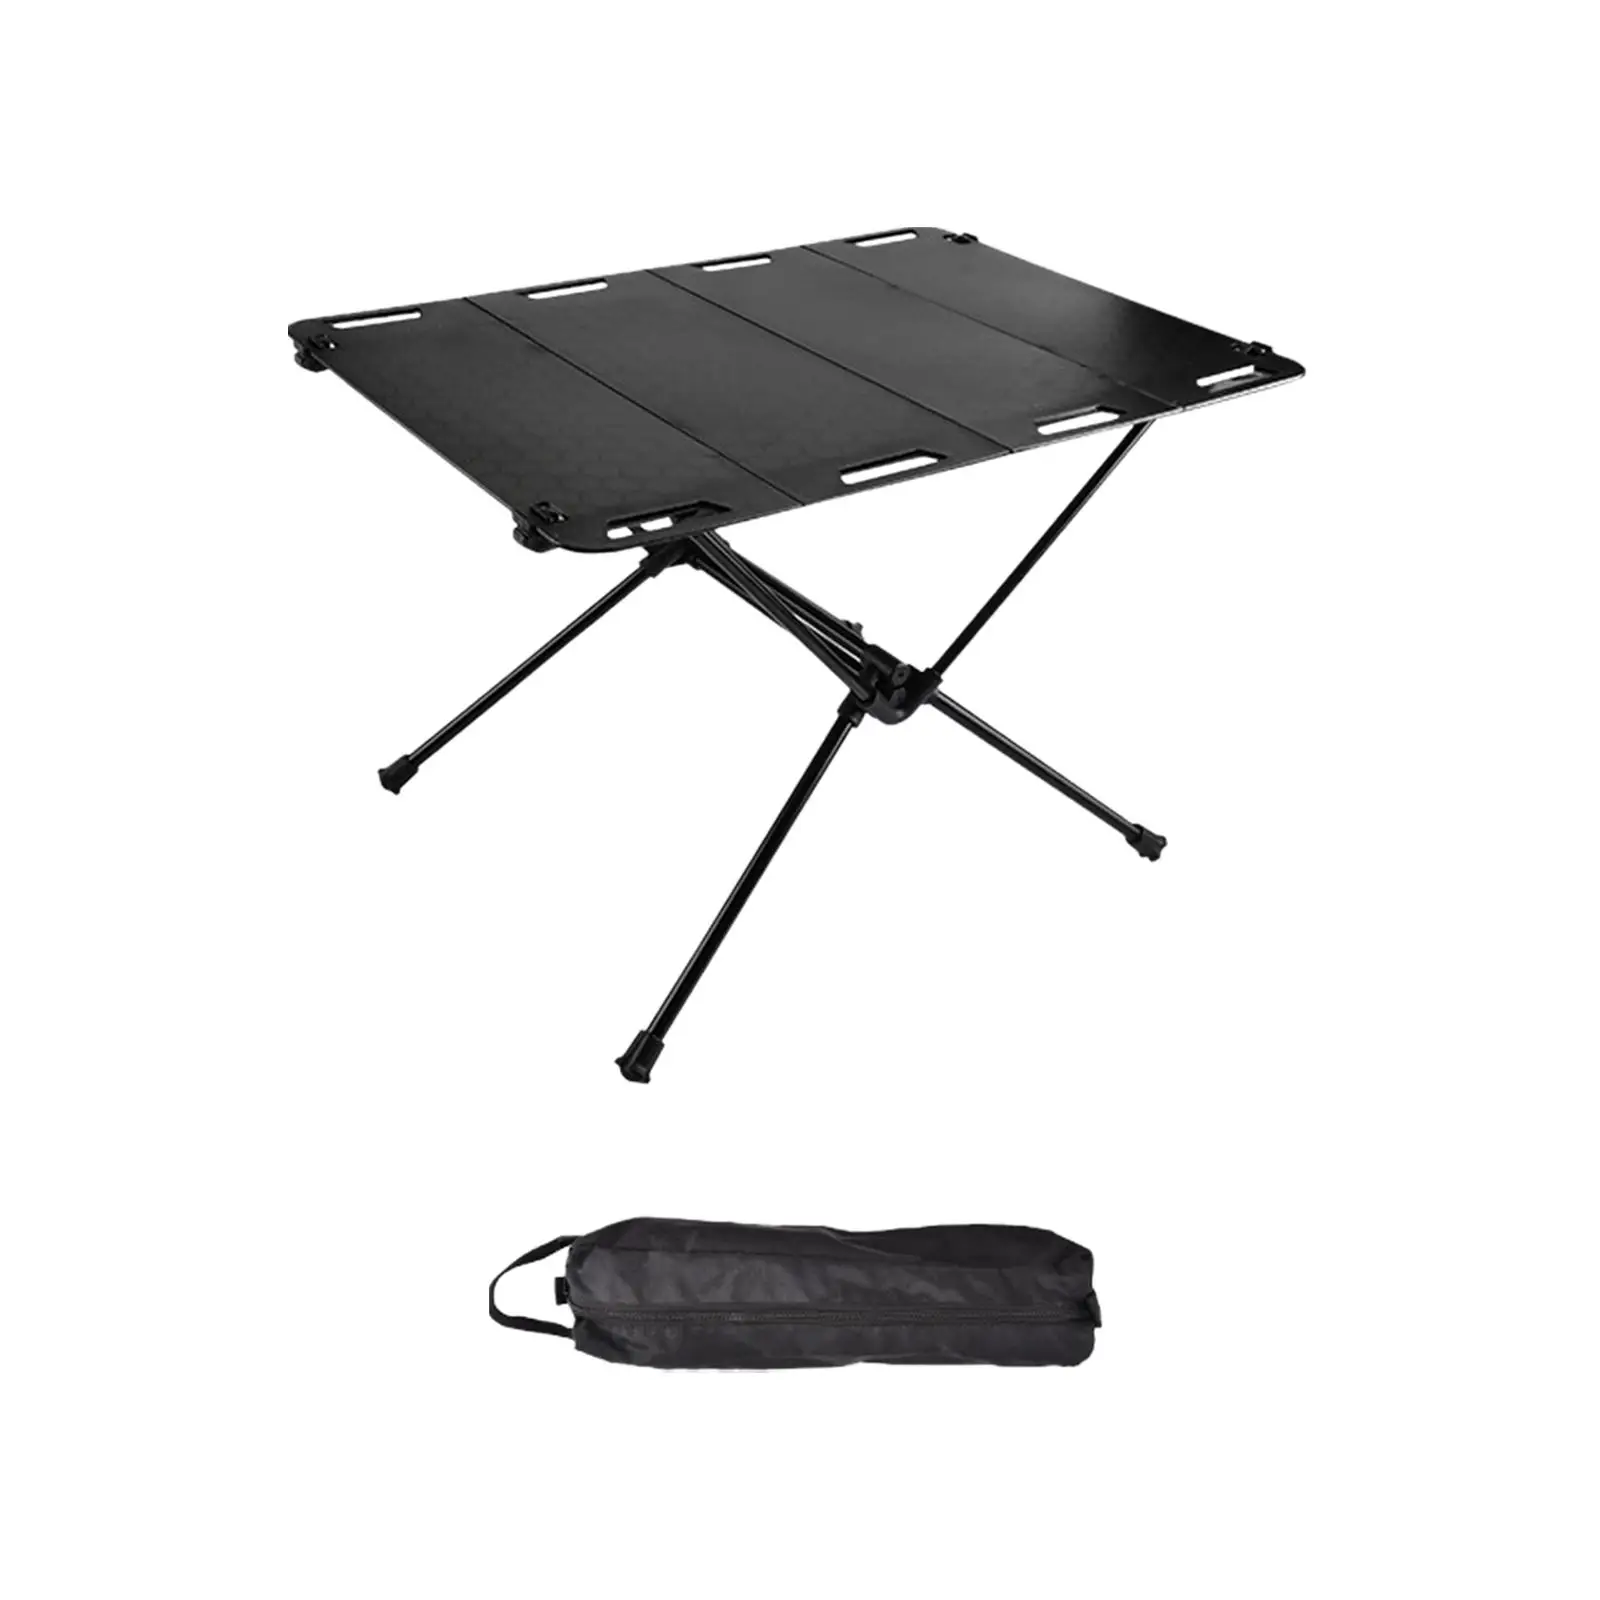 Foldable Camping Table with Carry Bag Camp Table Camping Desk Beach Table Outdoor Table for Hiking Picnic Yard Fishing Backyard